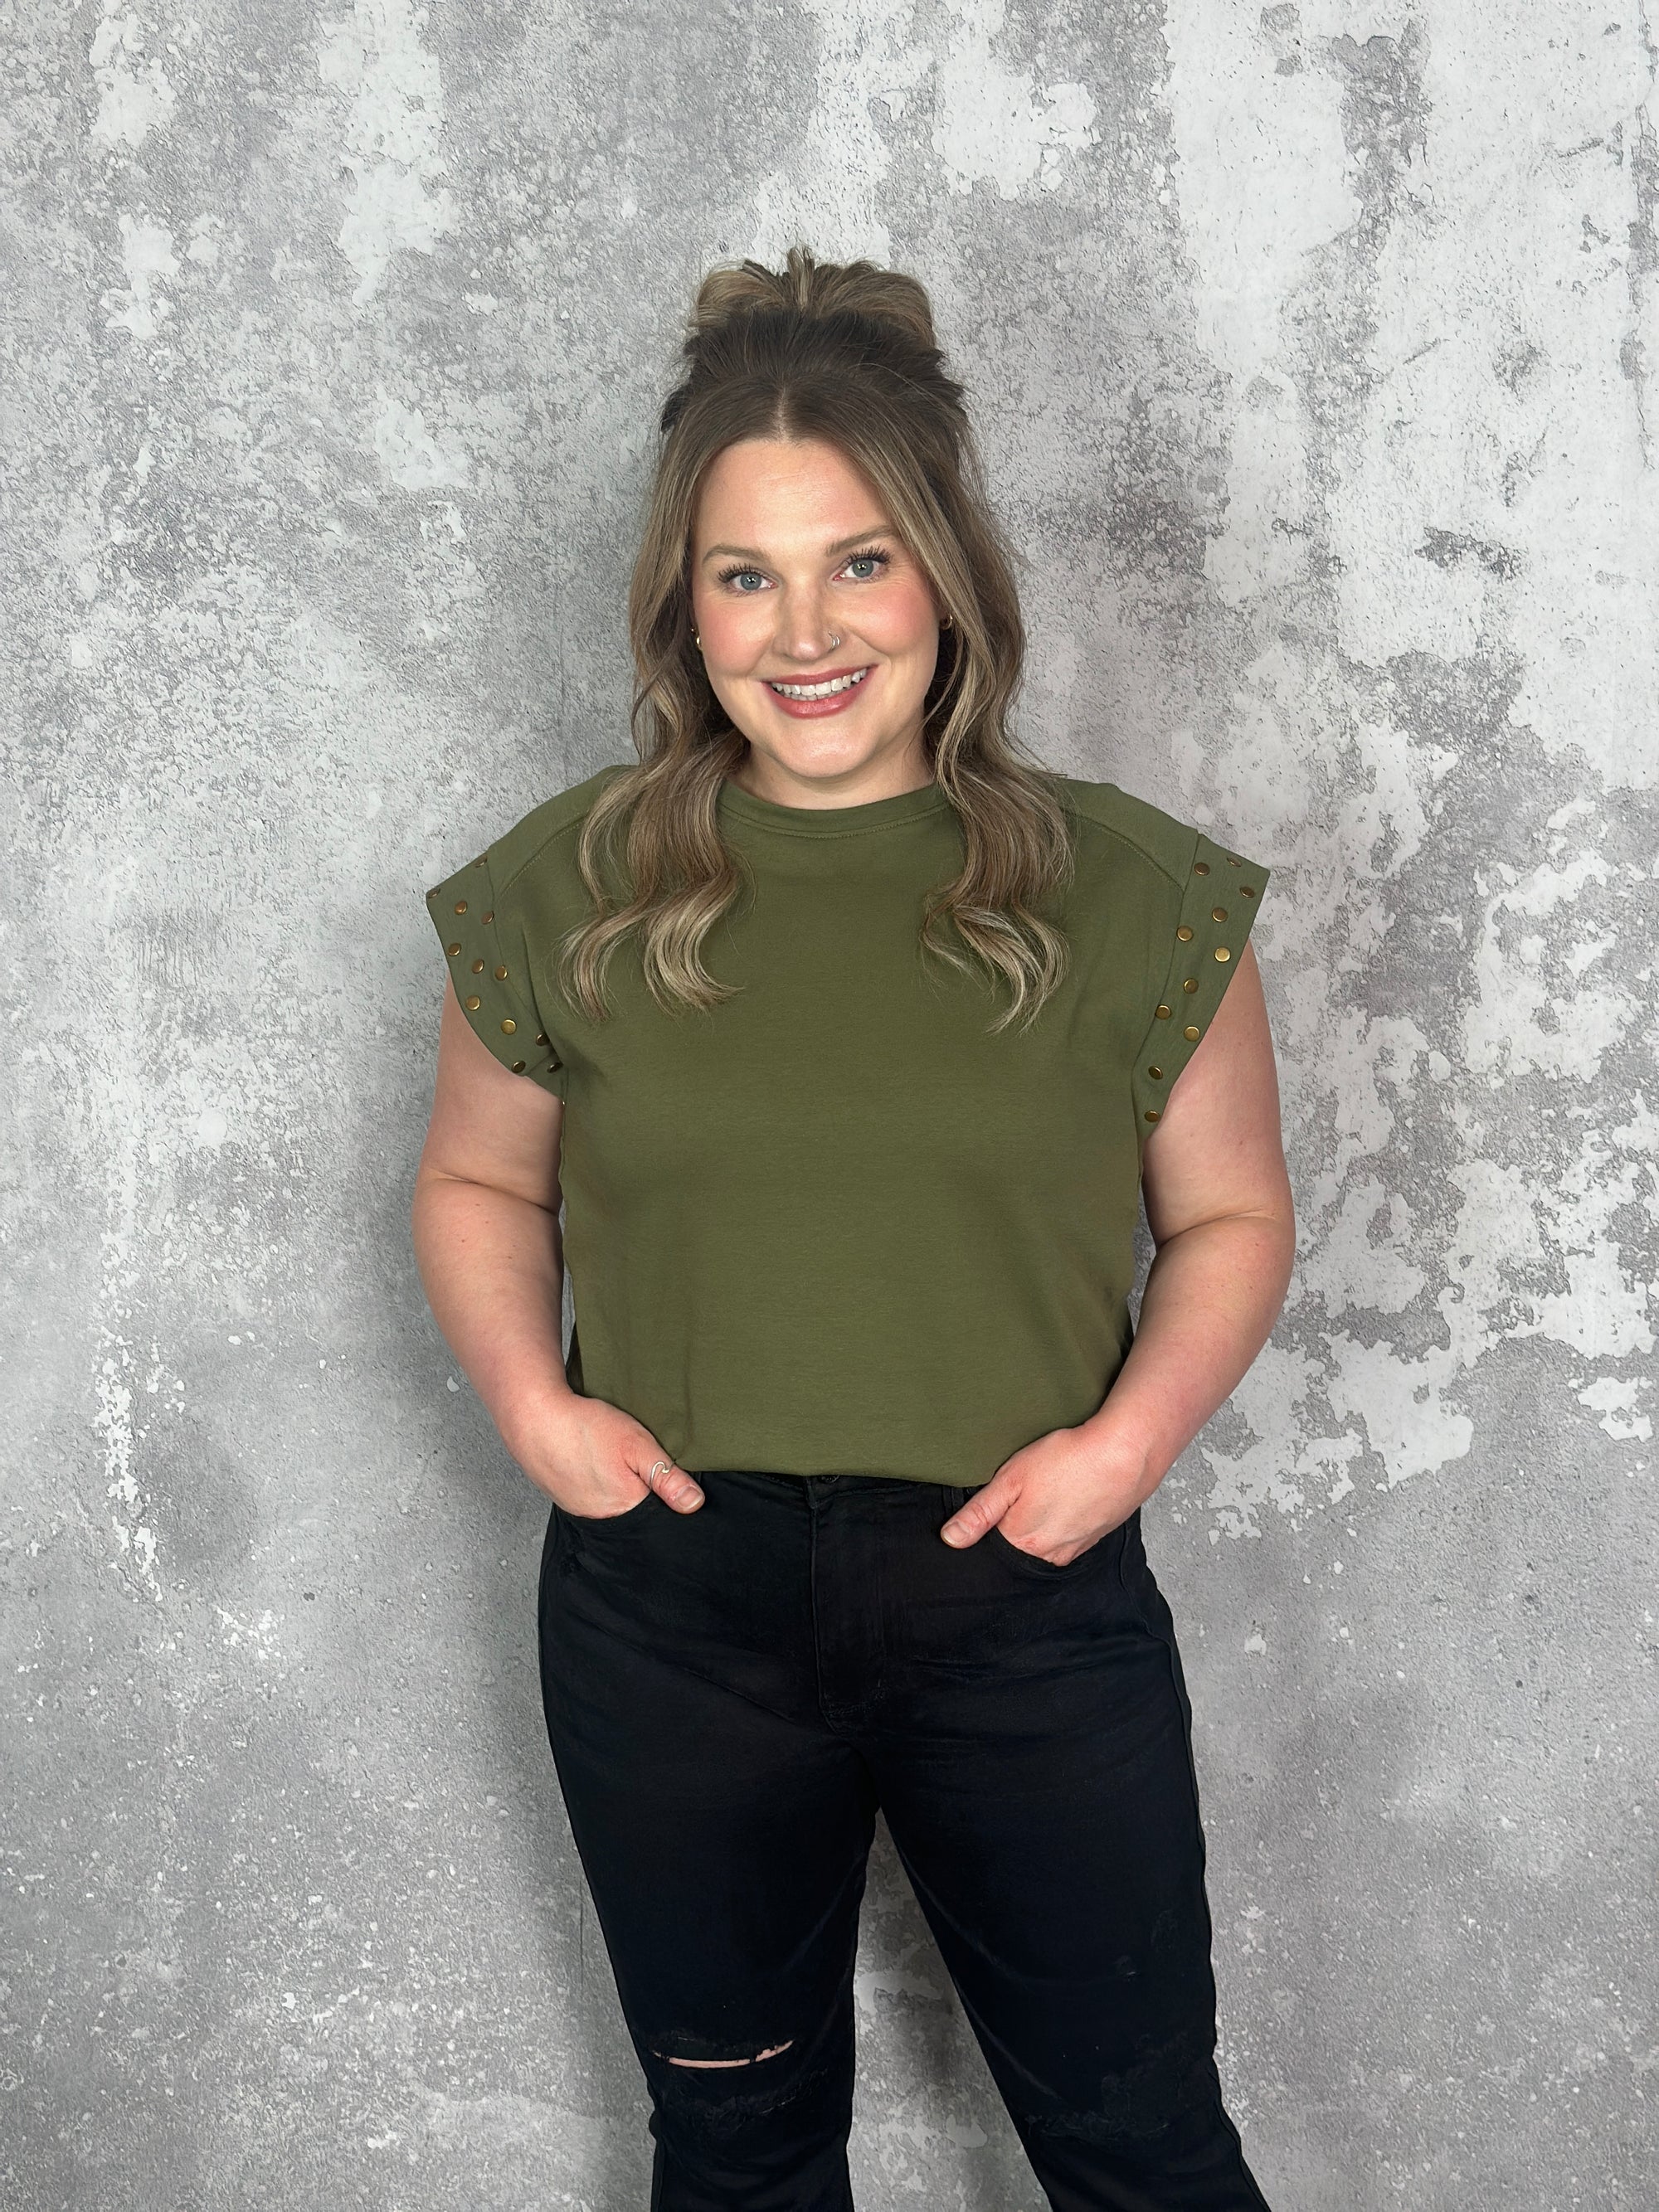 Drop Studded Top - Olive (Small - 3X)